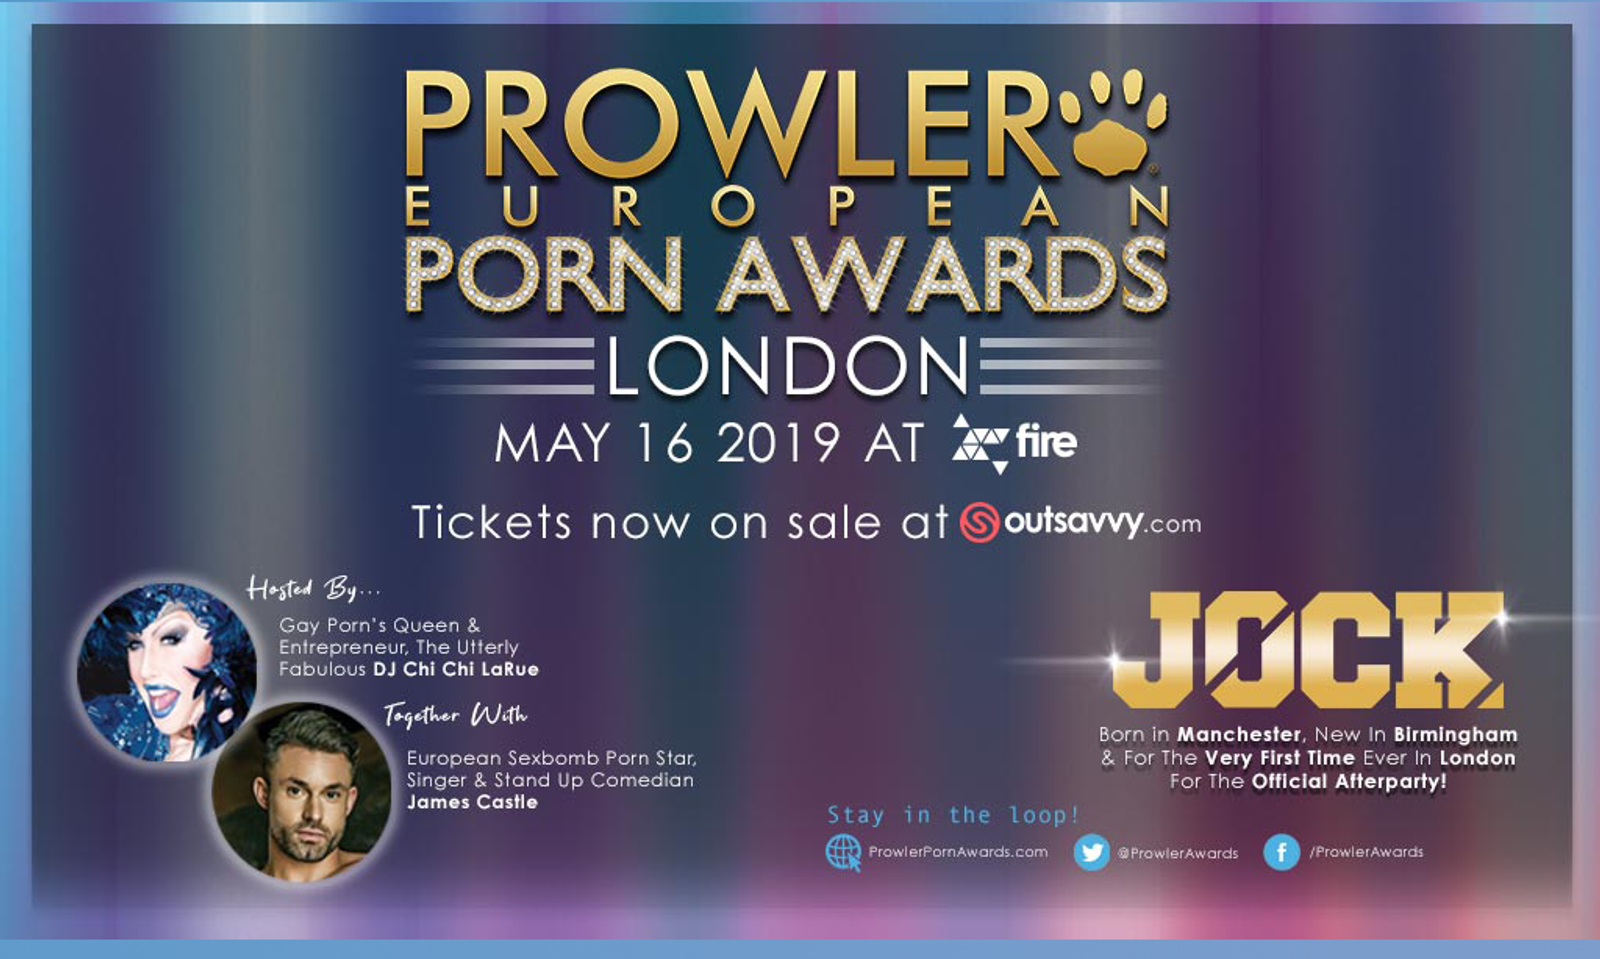 Prowler European Porn Awards To Be Held May 16 in London